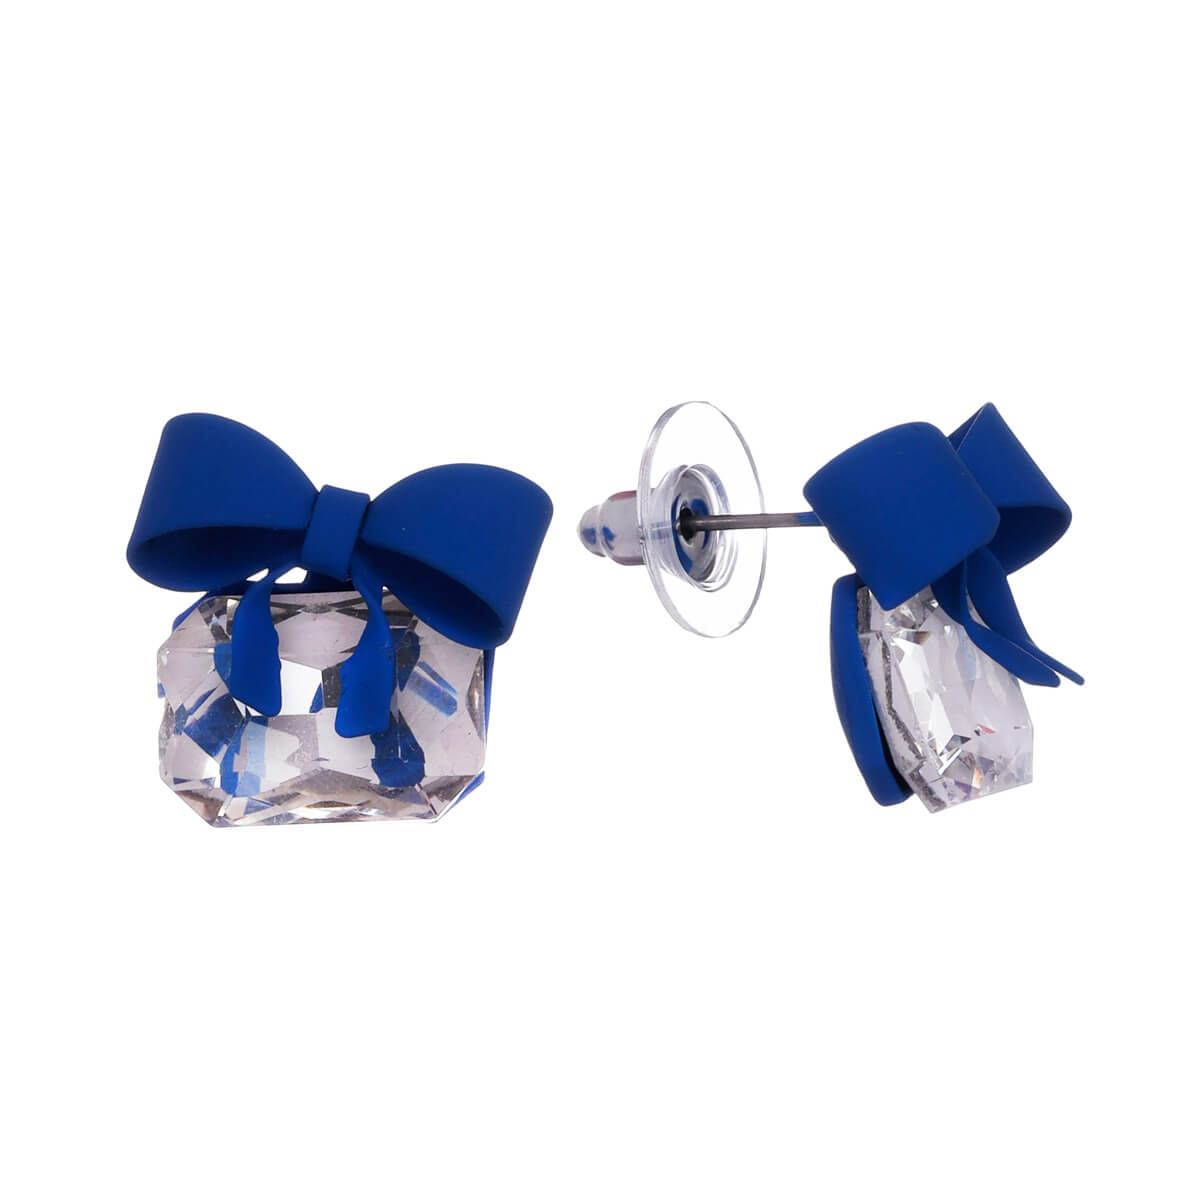 Bow tie earrings with glass stone